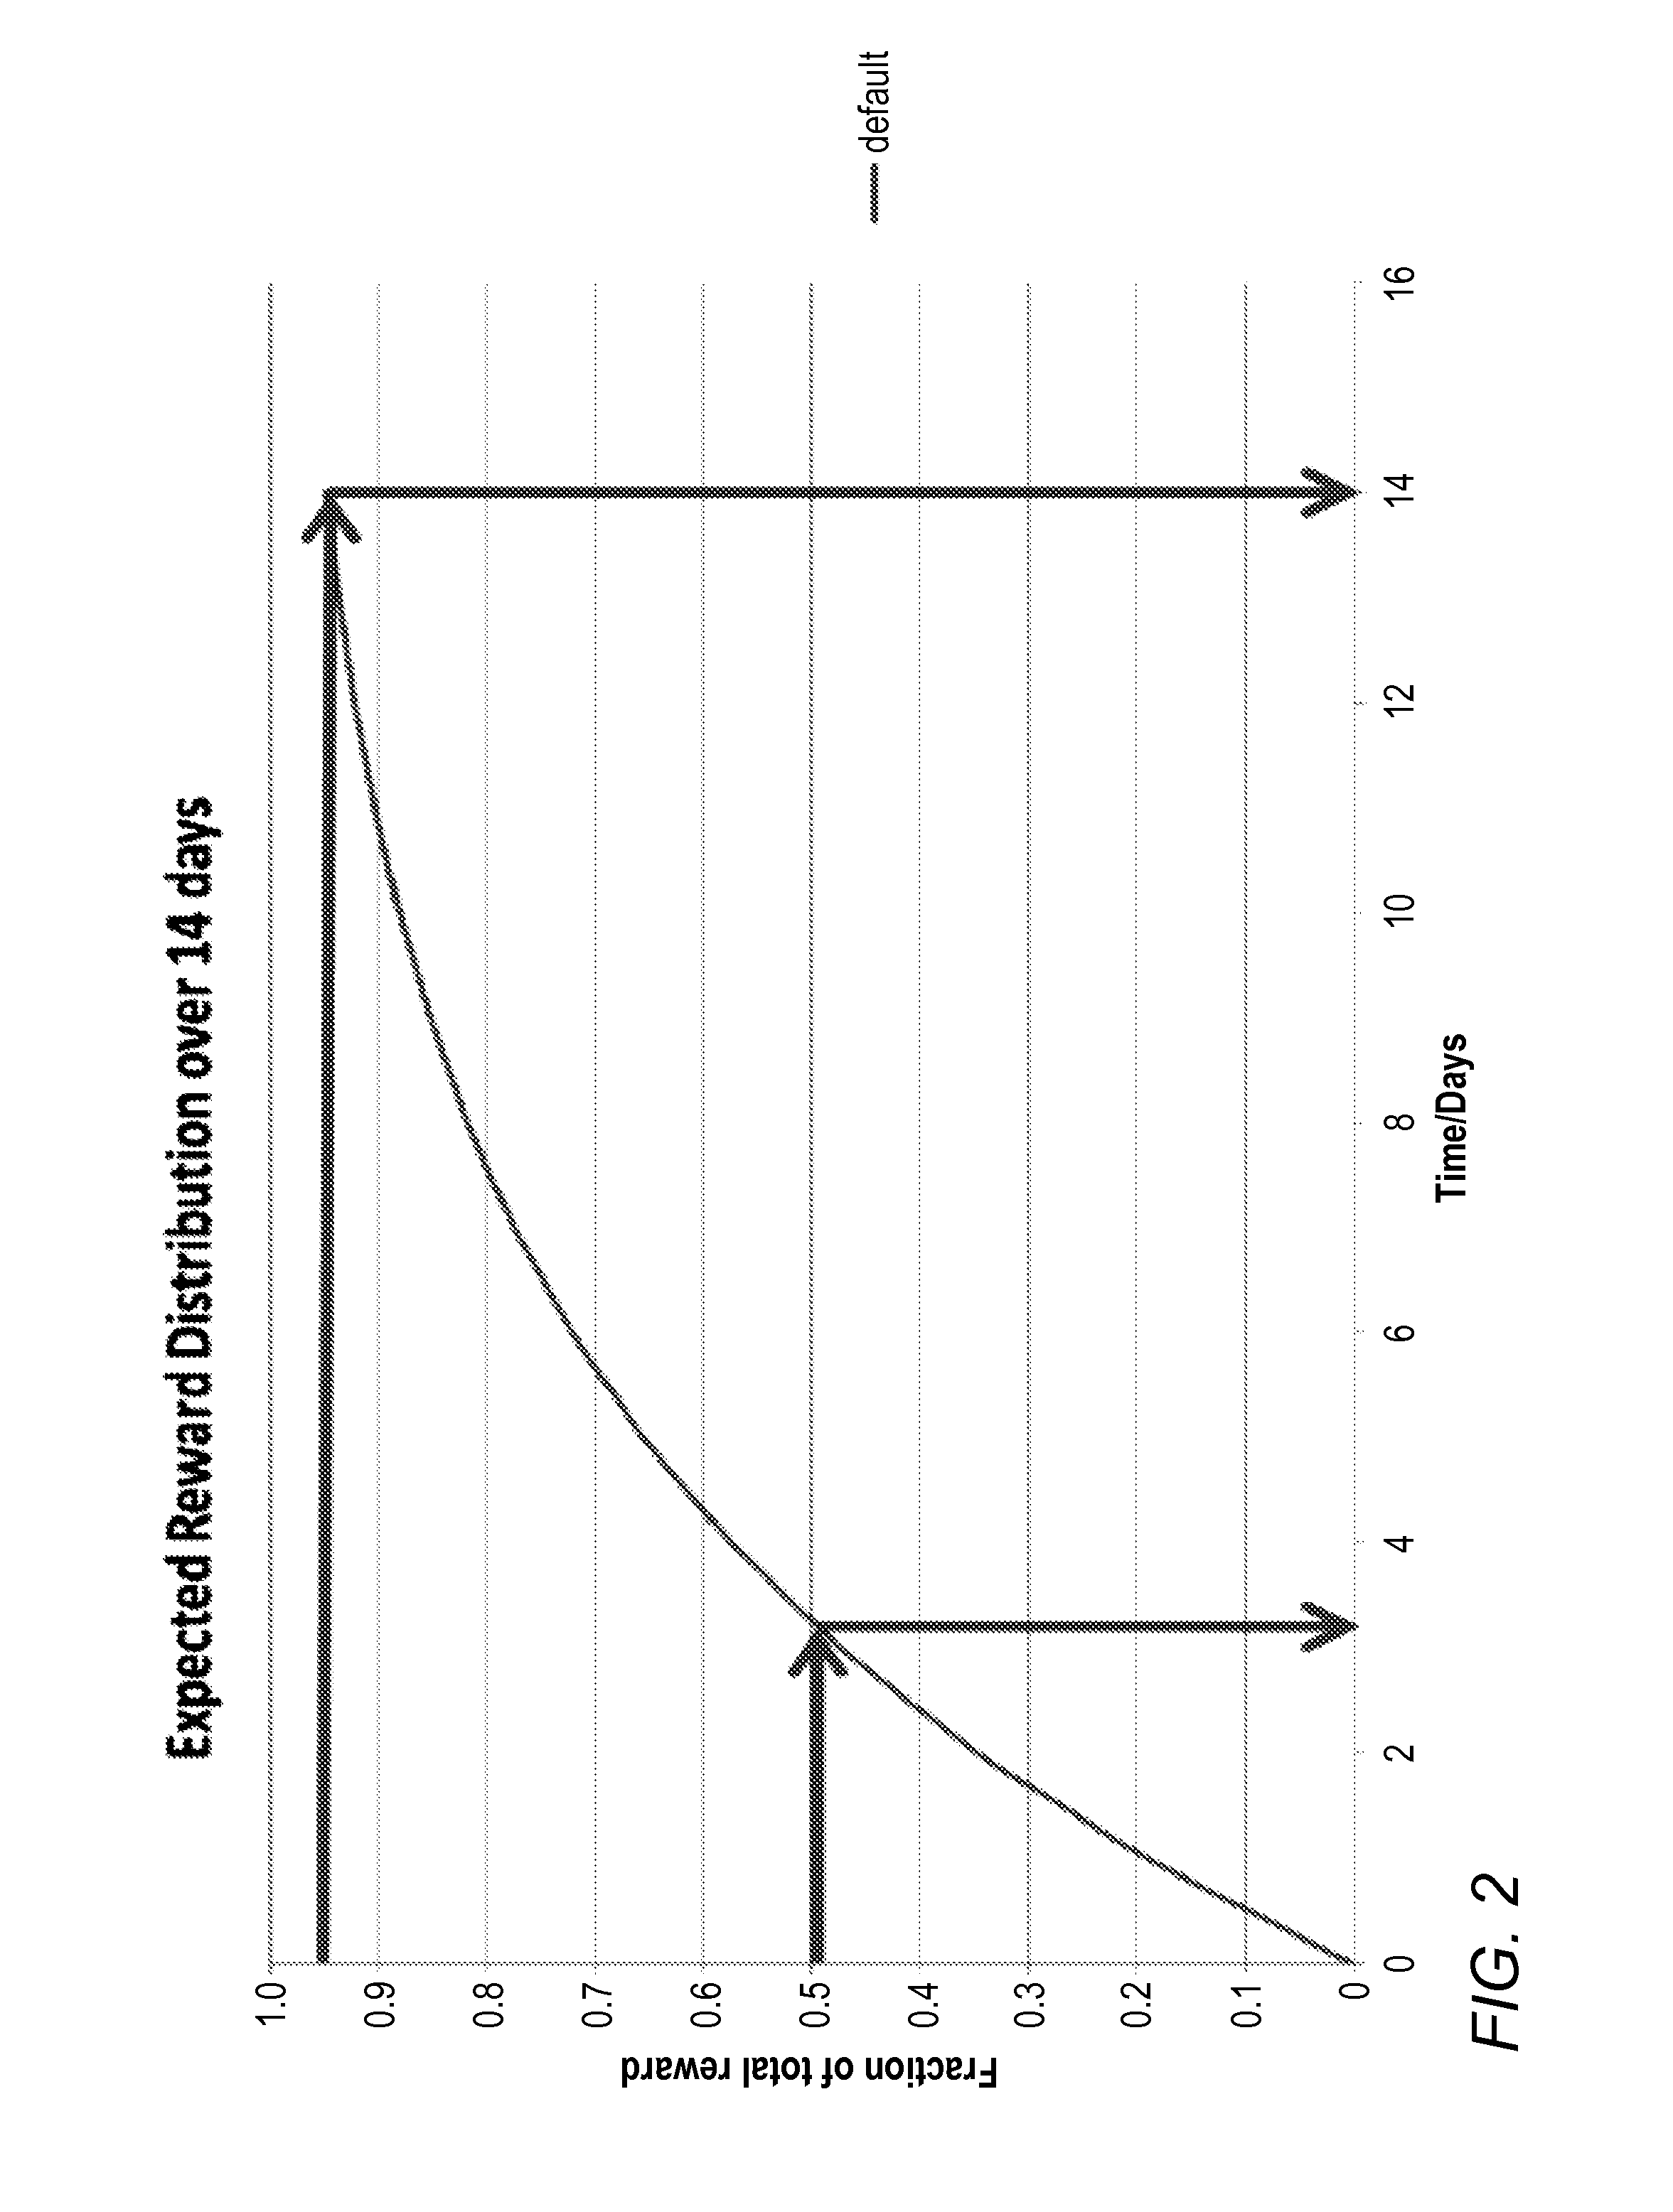 Systems and methods for offer selection and reward distribution learning